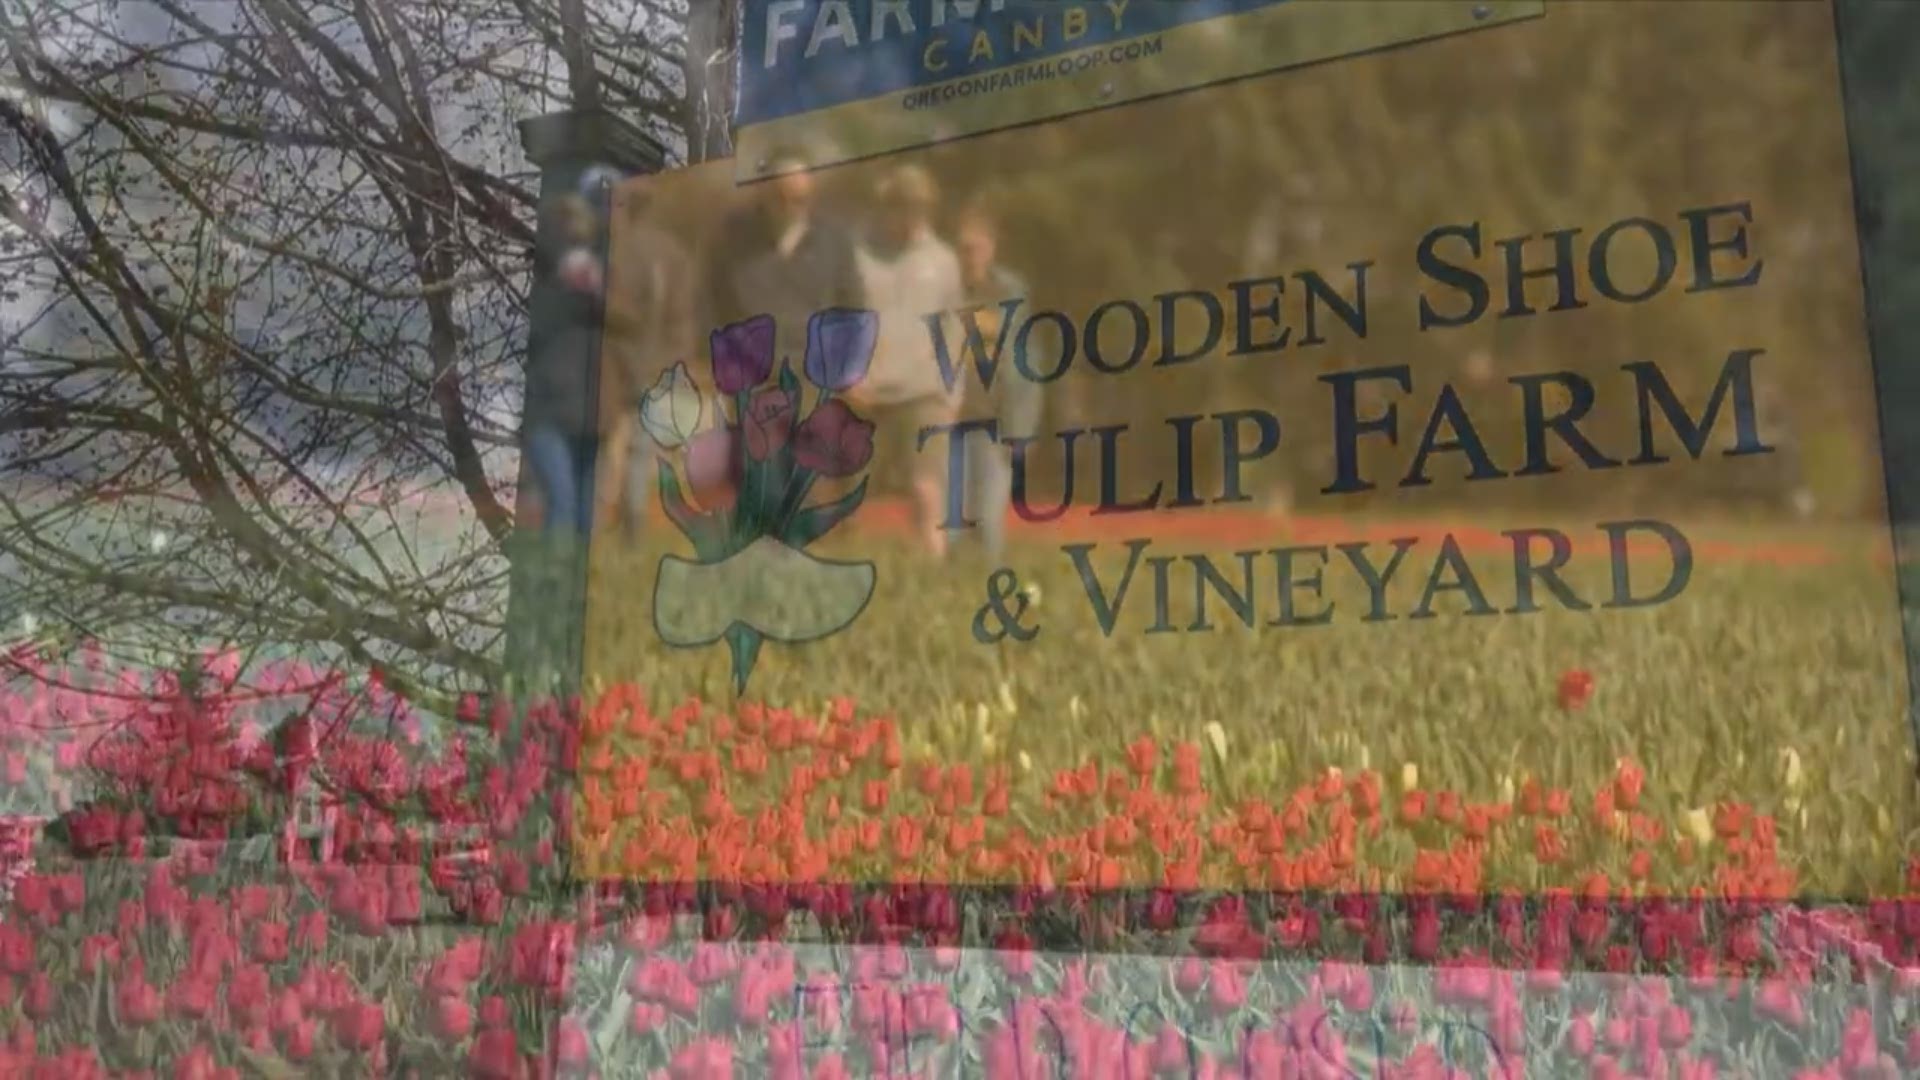 The 2020 Wooden Shoe Tulip Festival is canceled. But, as one door closed, a window of opportunity opened to bring a little joy in these uncertain times.